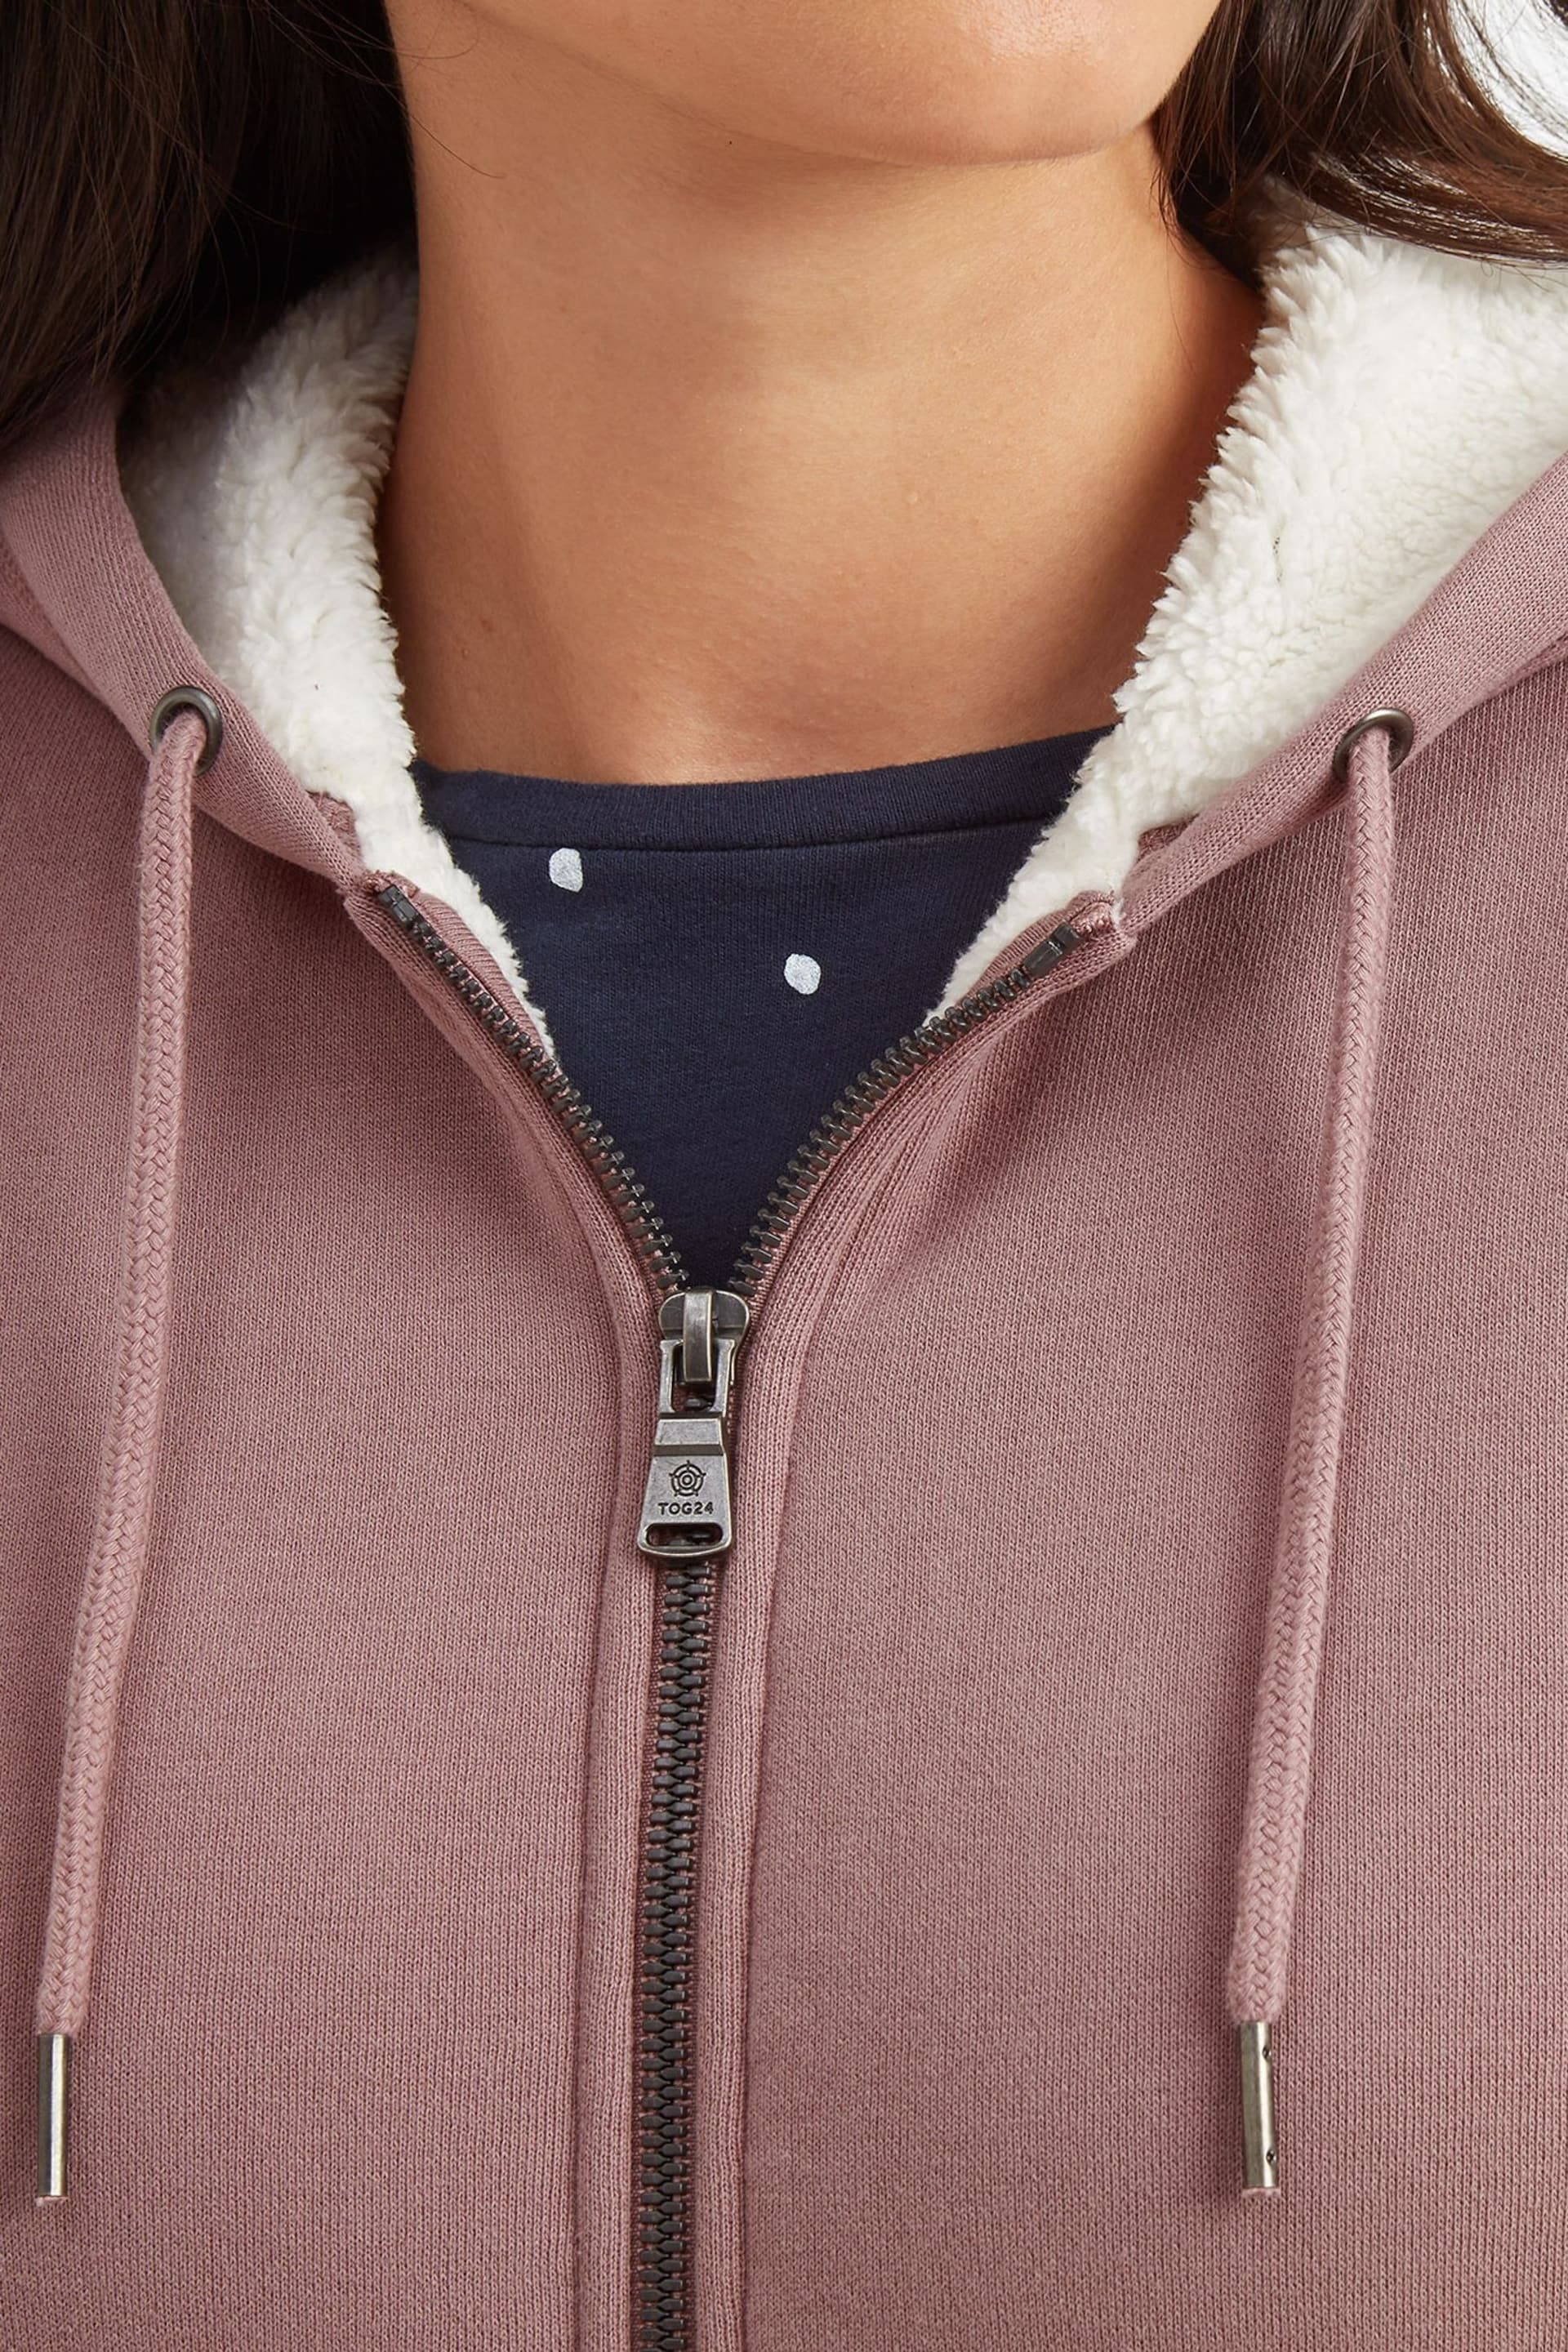 Tog 24 Pink Finch Sherpa Lined Hoodie - Image 4 of 6